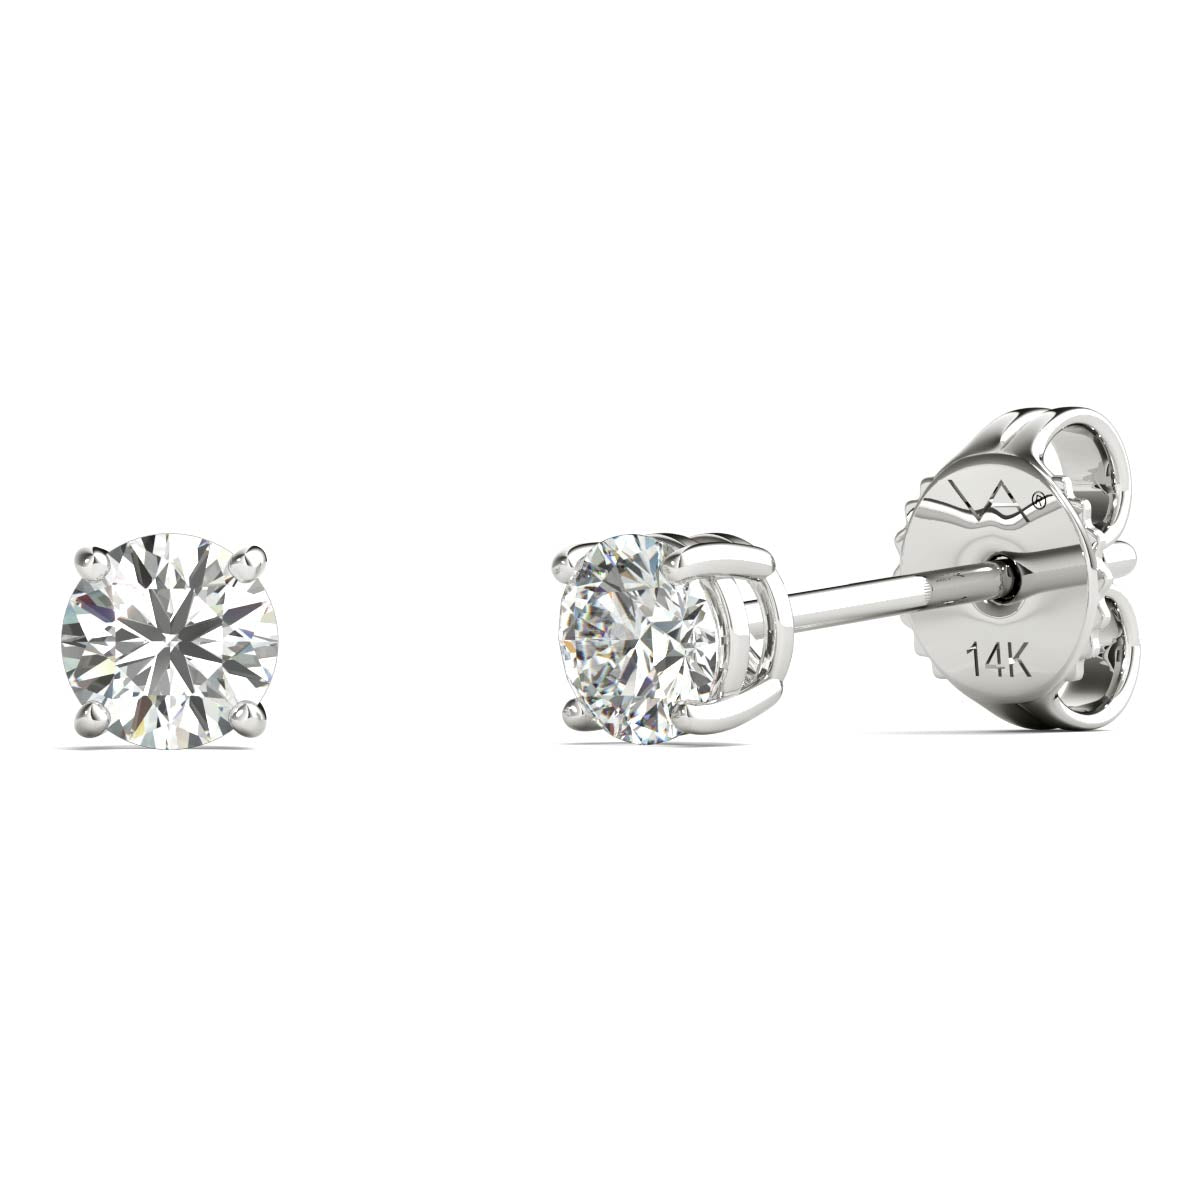 Solitaire Diamond Earrings (1/4 Ct tw, AGS Certified, GH/I1-I2) White Gold